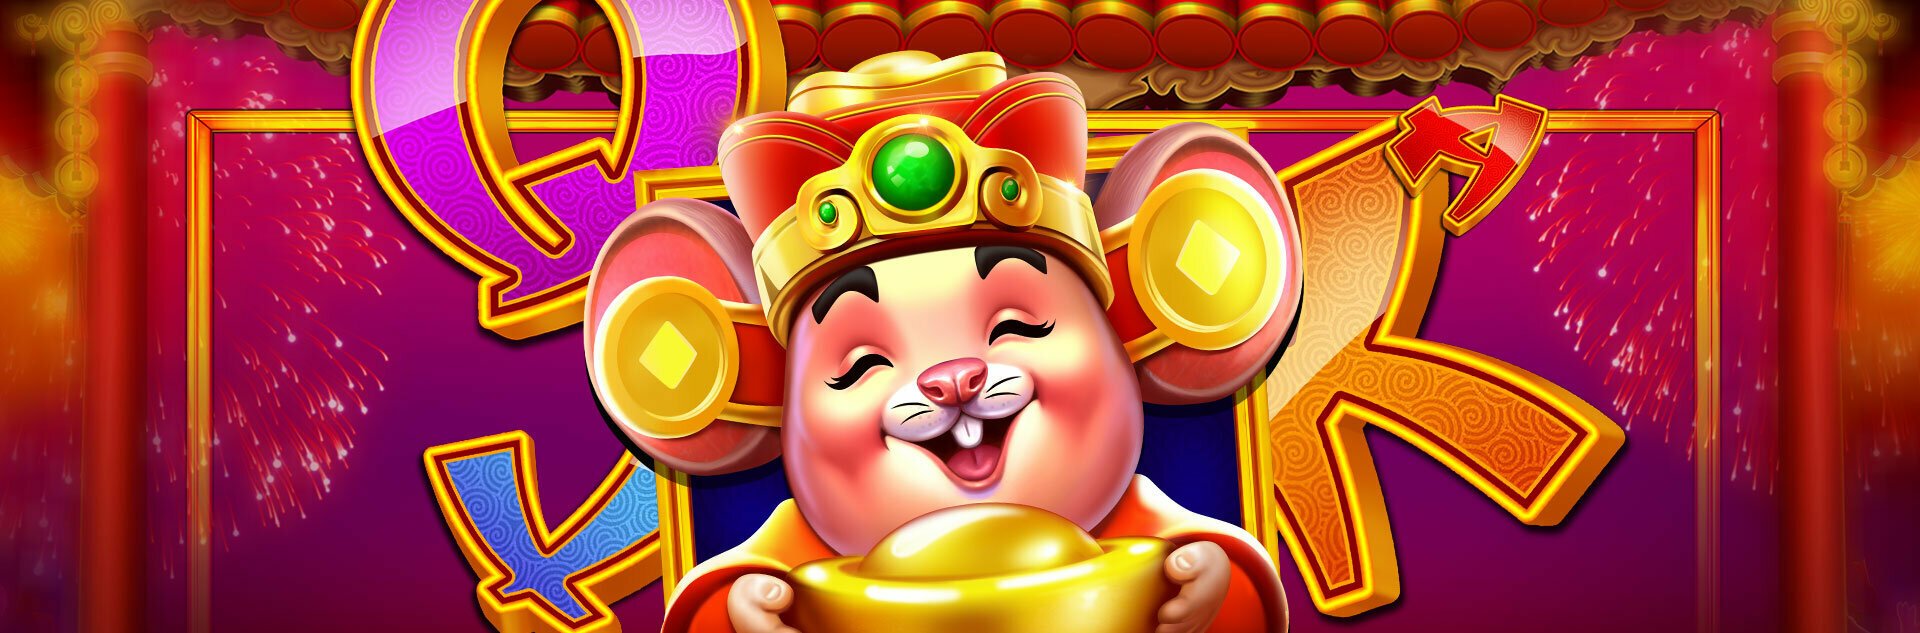 Play Money Mouse™ Free Slot